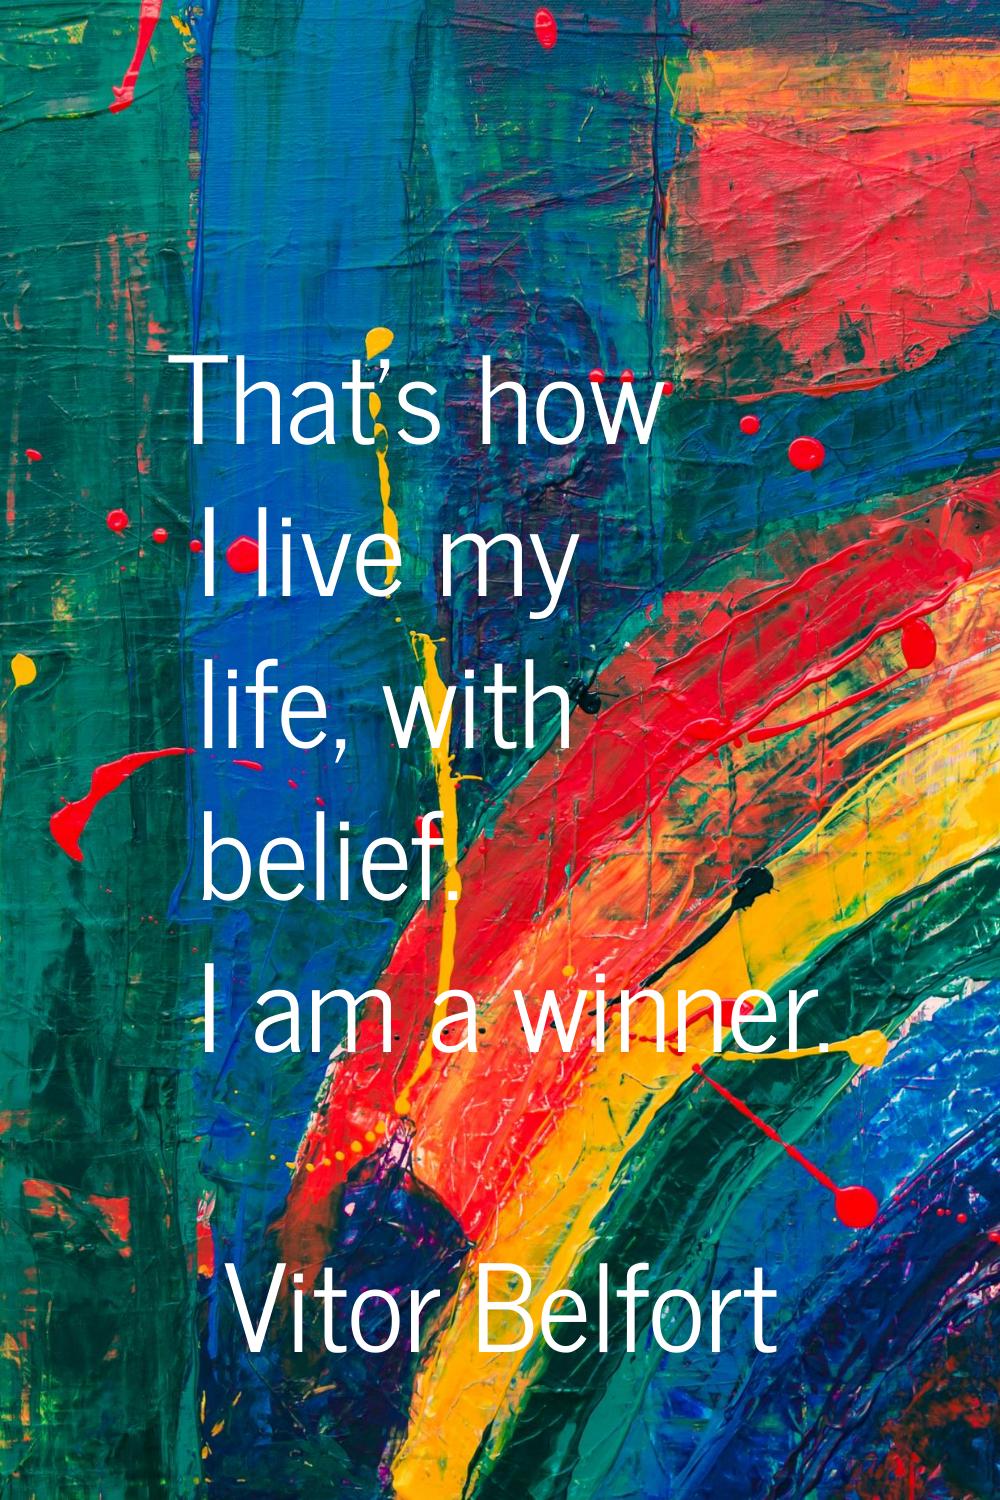 That's how I live my life, with belief. I am a winner.